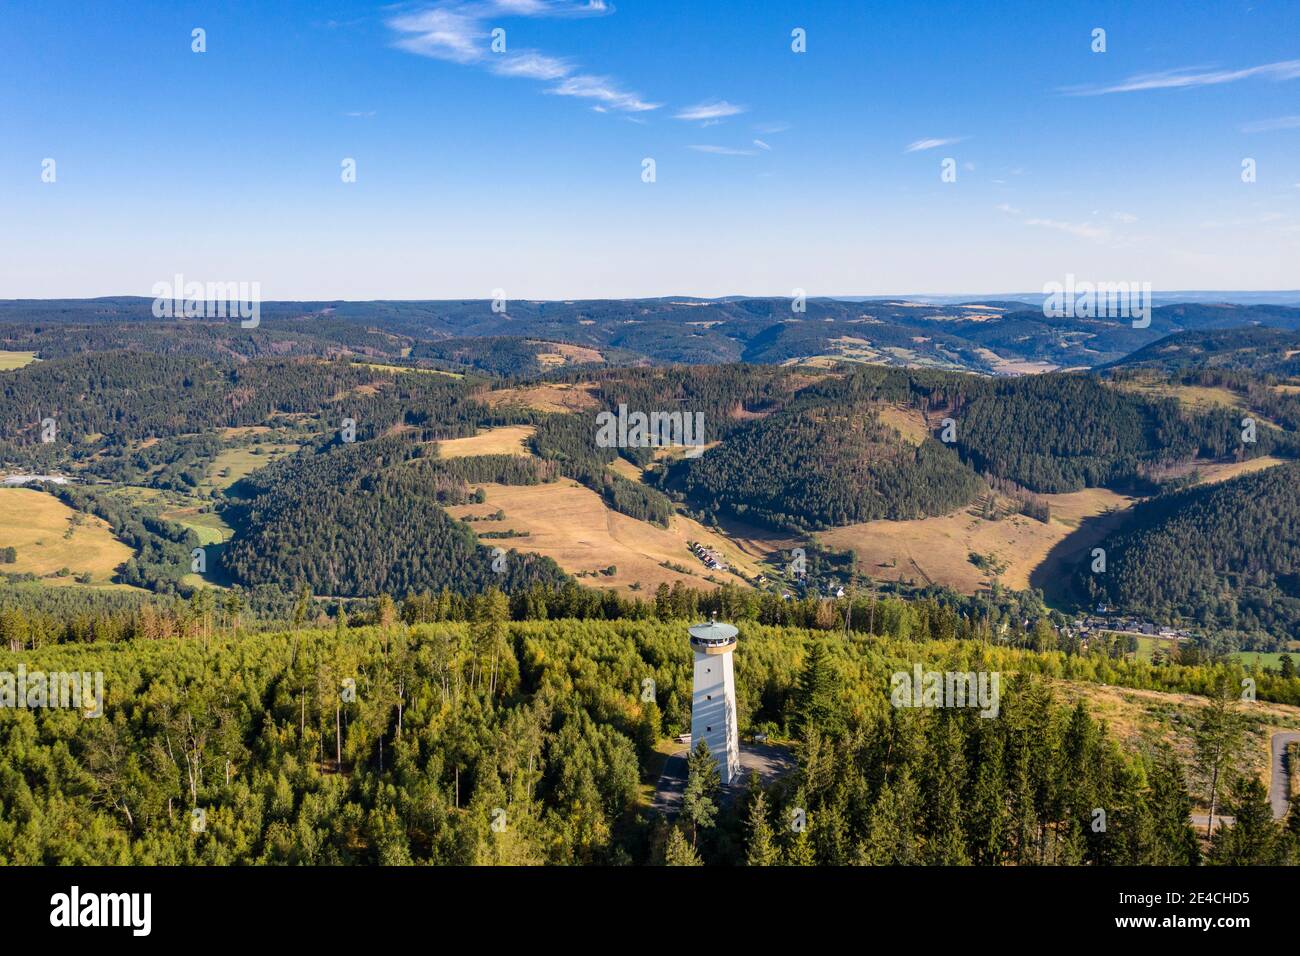 Germany, Bavaria, Lauenstein, Thüringer Warte, observation tower, view of the former GDR, mountains, forest, aerial view Stock Photo